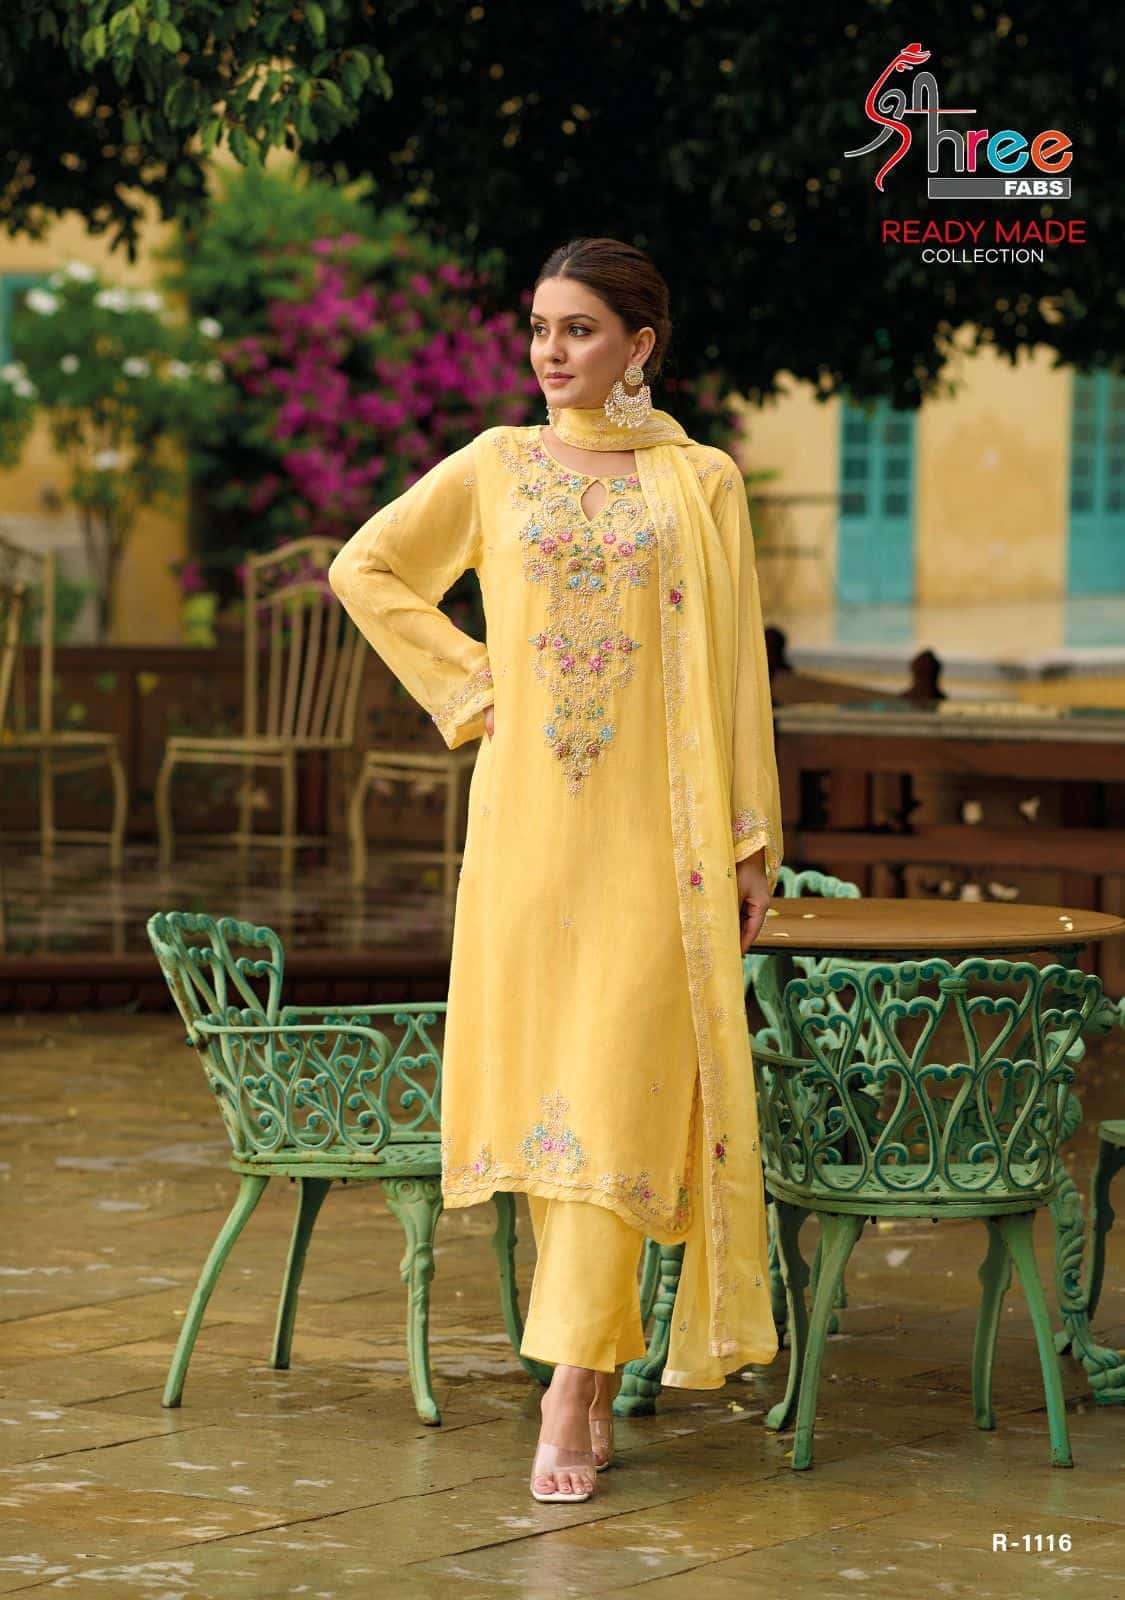 Shree Fabs R 1116 Readymade Collection Fancy Designer Pakistani Salwar Suit Dealers